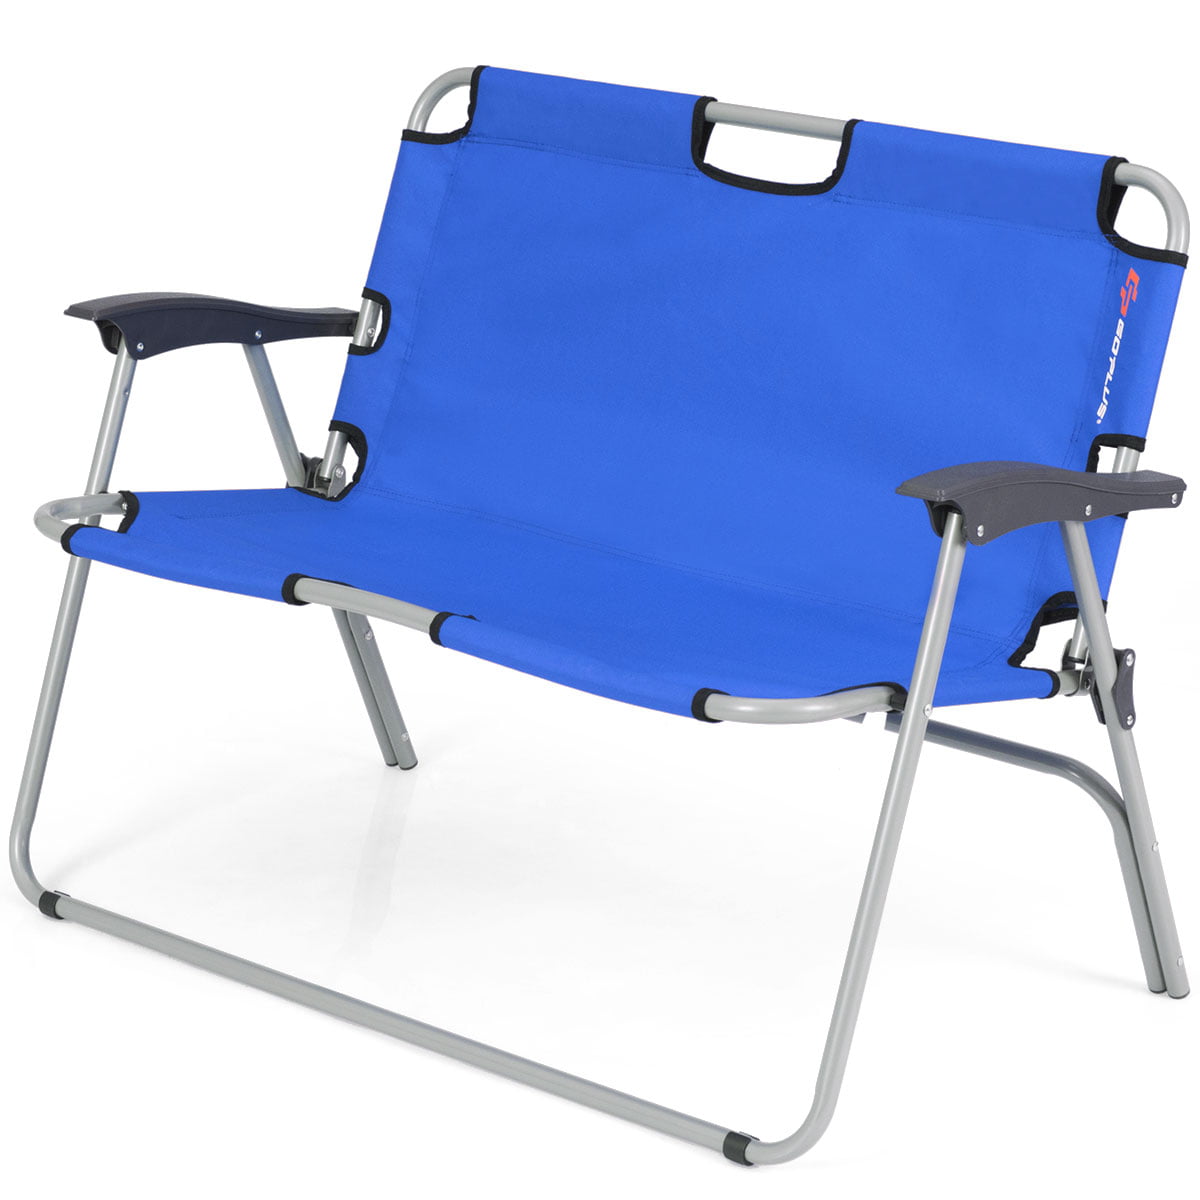 Topbuy 2 Person Camping Folding Chair Loveseat Bench